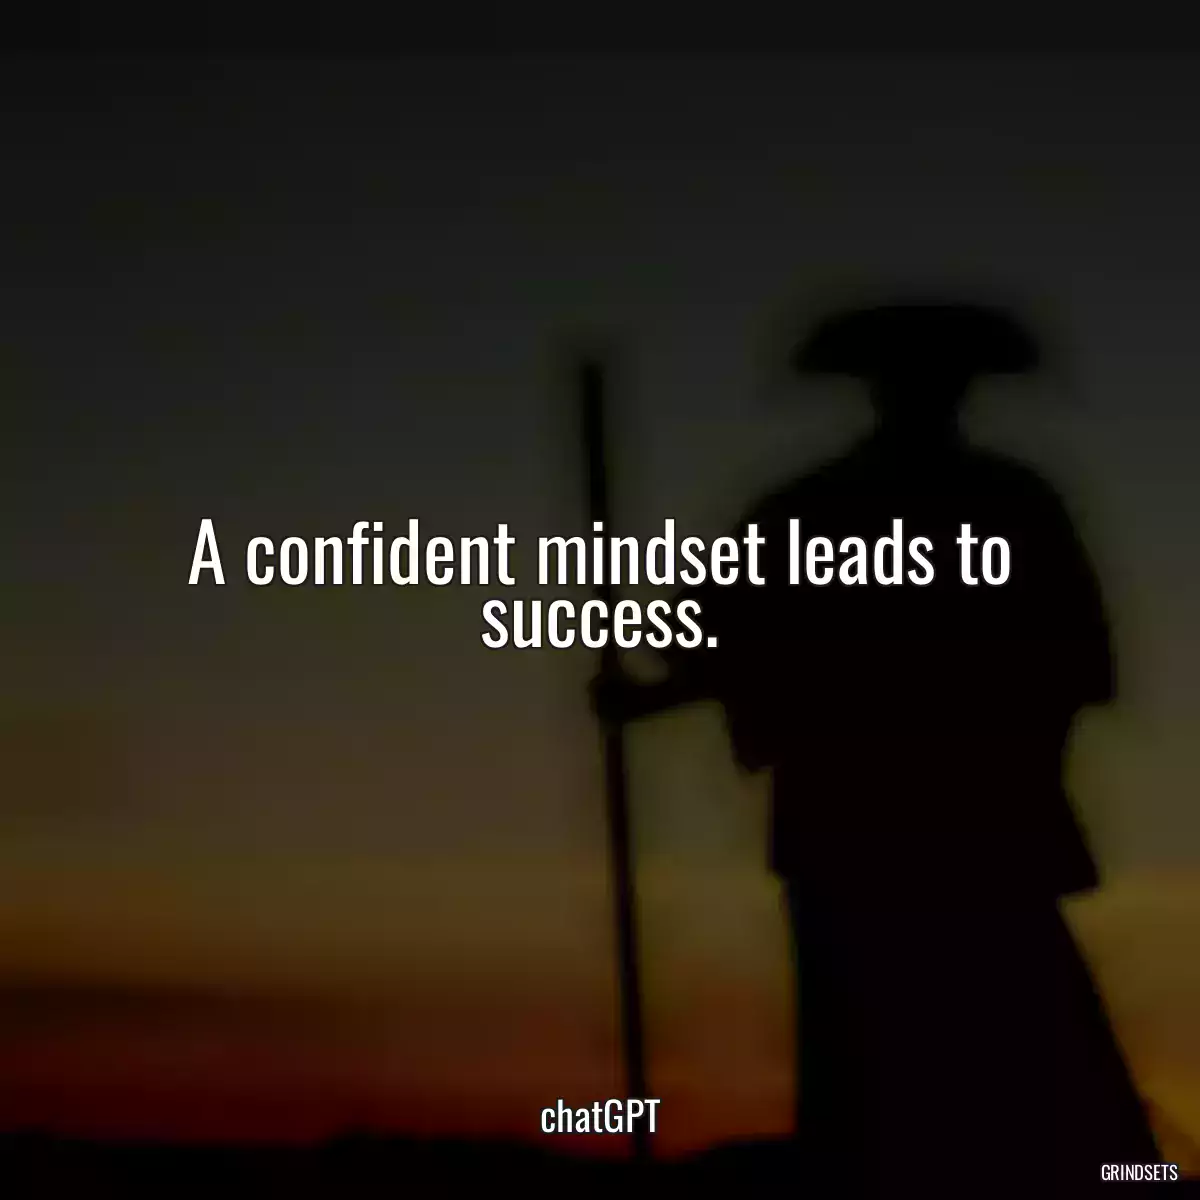 A confident mindset leads to success.